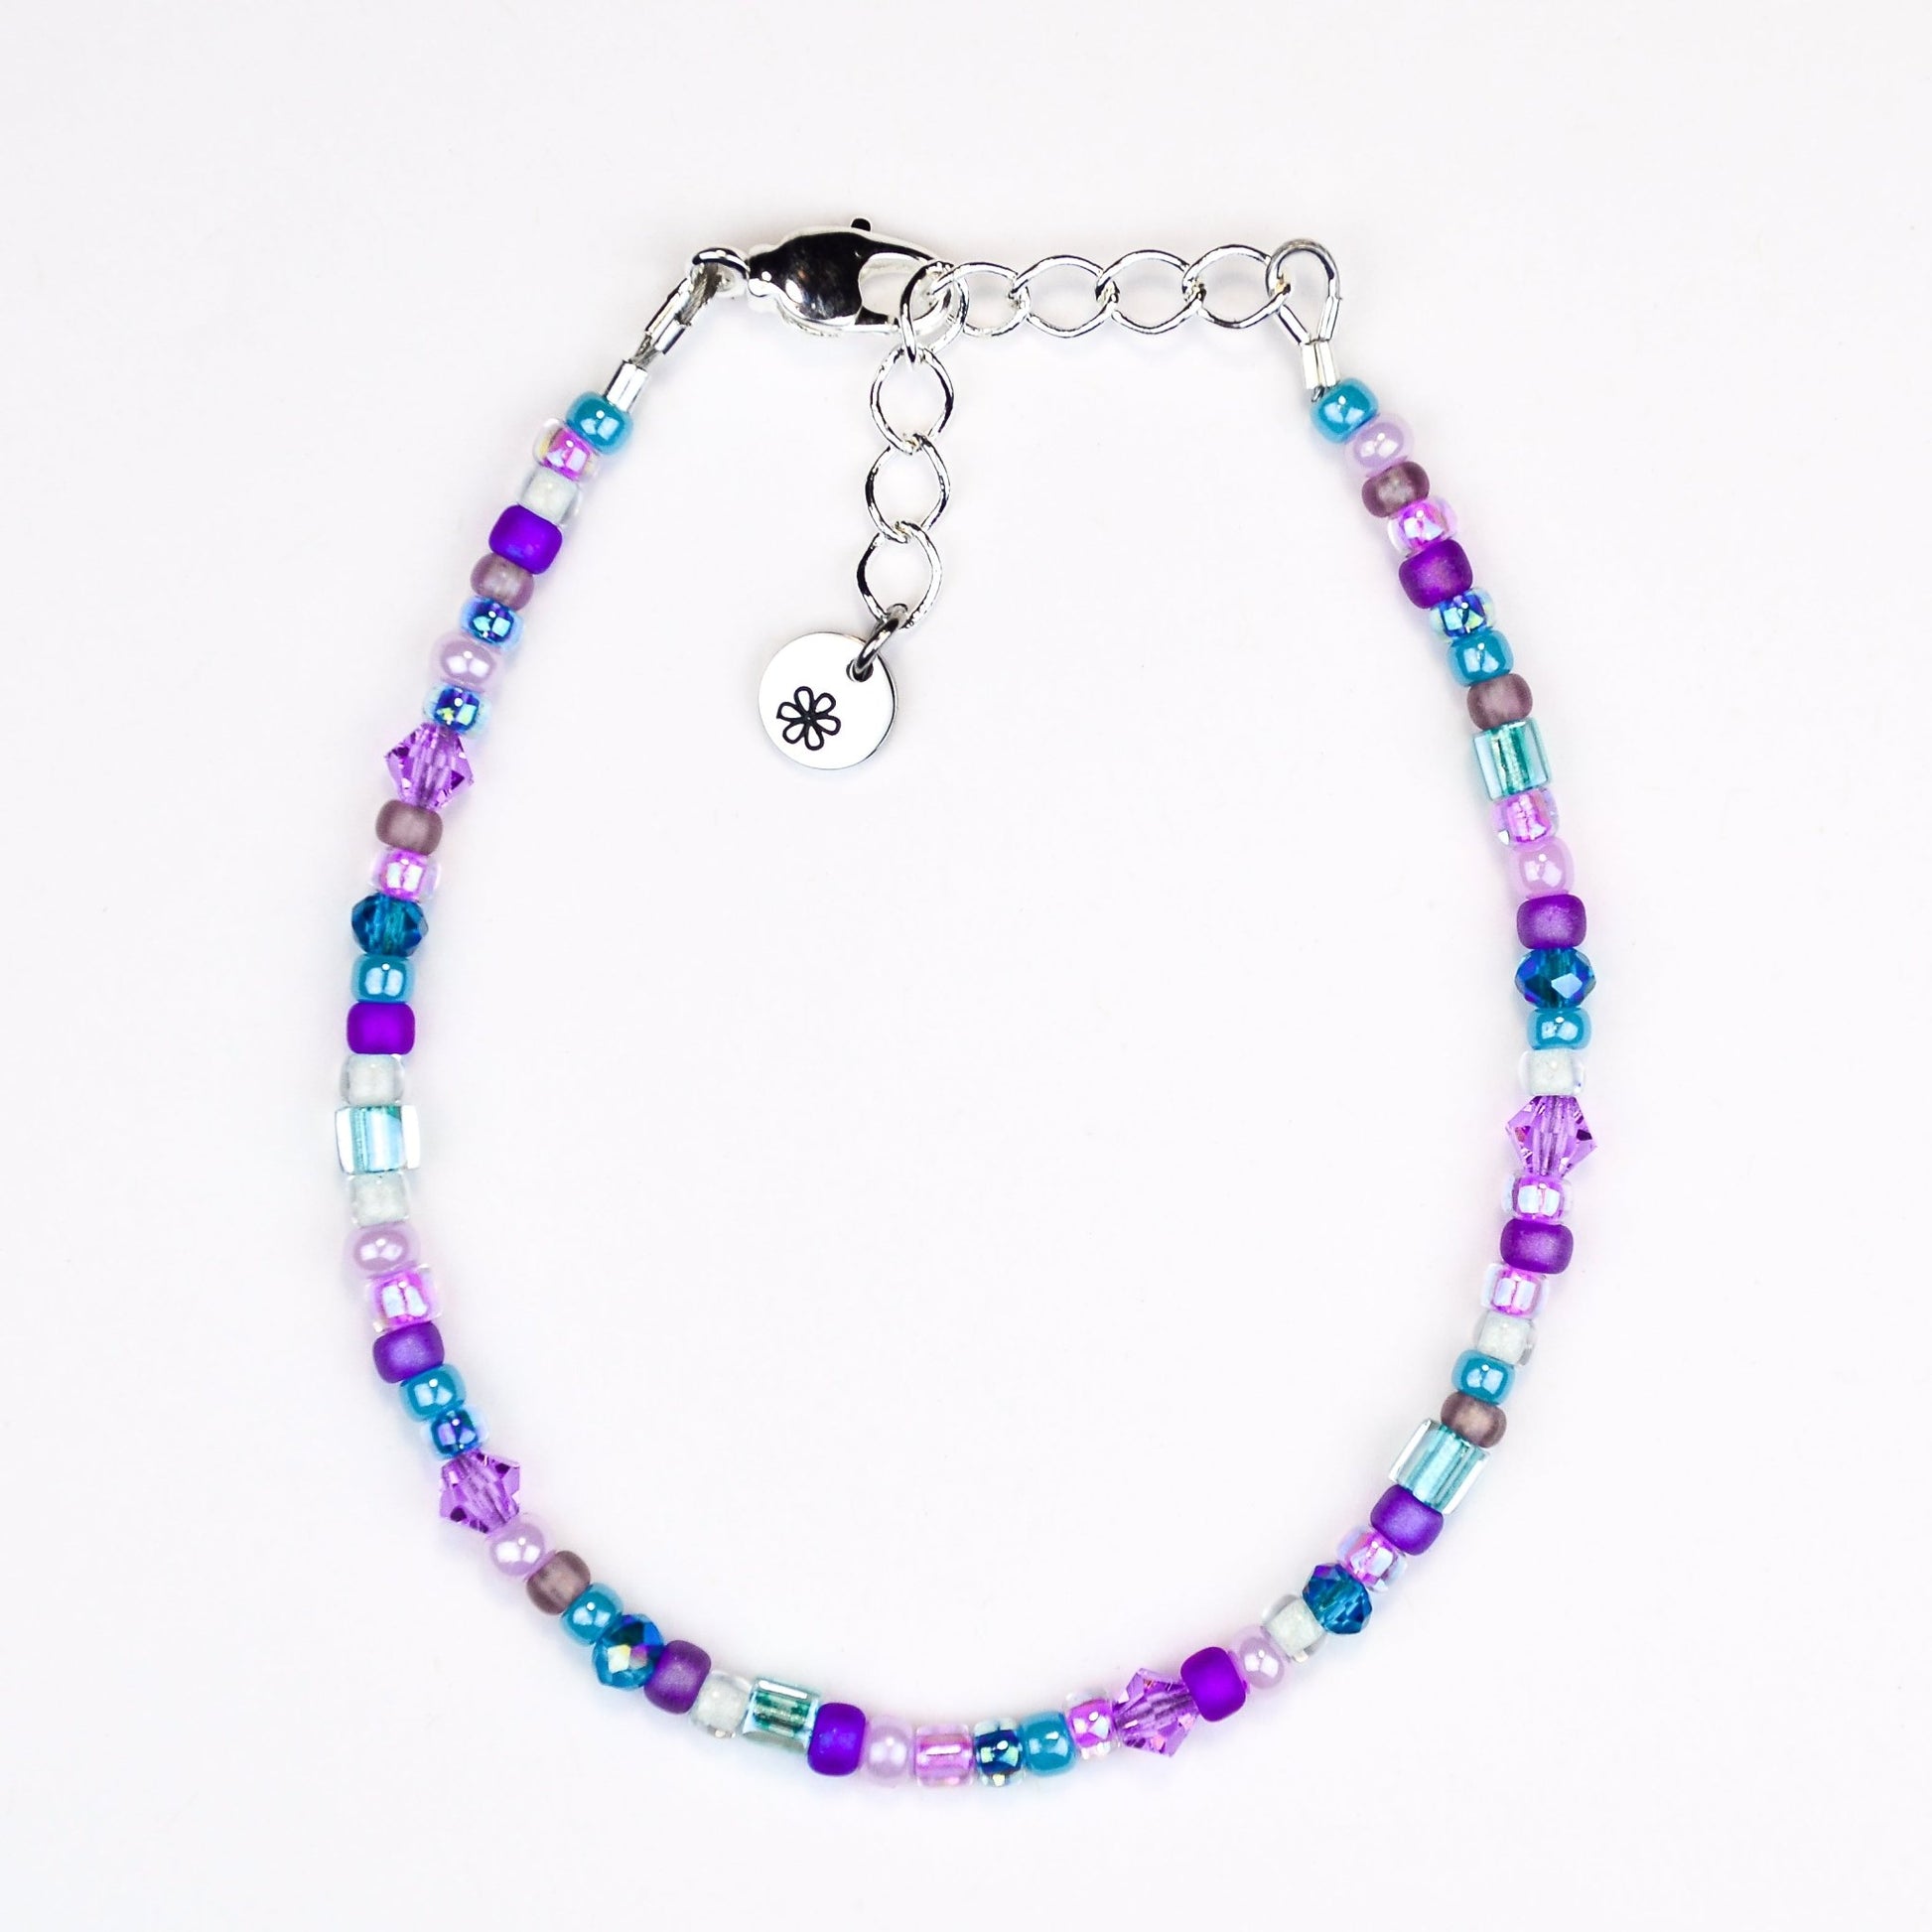 Assorted shaped glass seed beads - Light purple and teal bracelet - creations by cherie